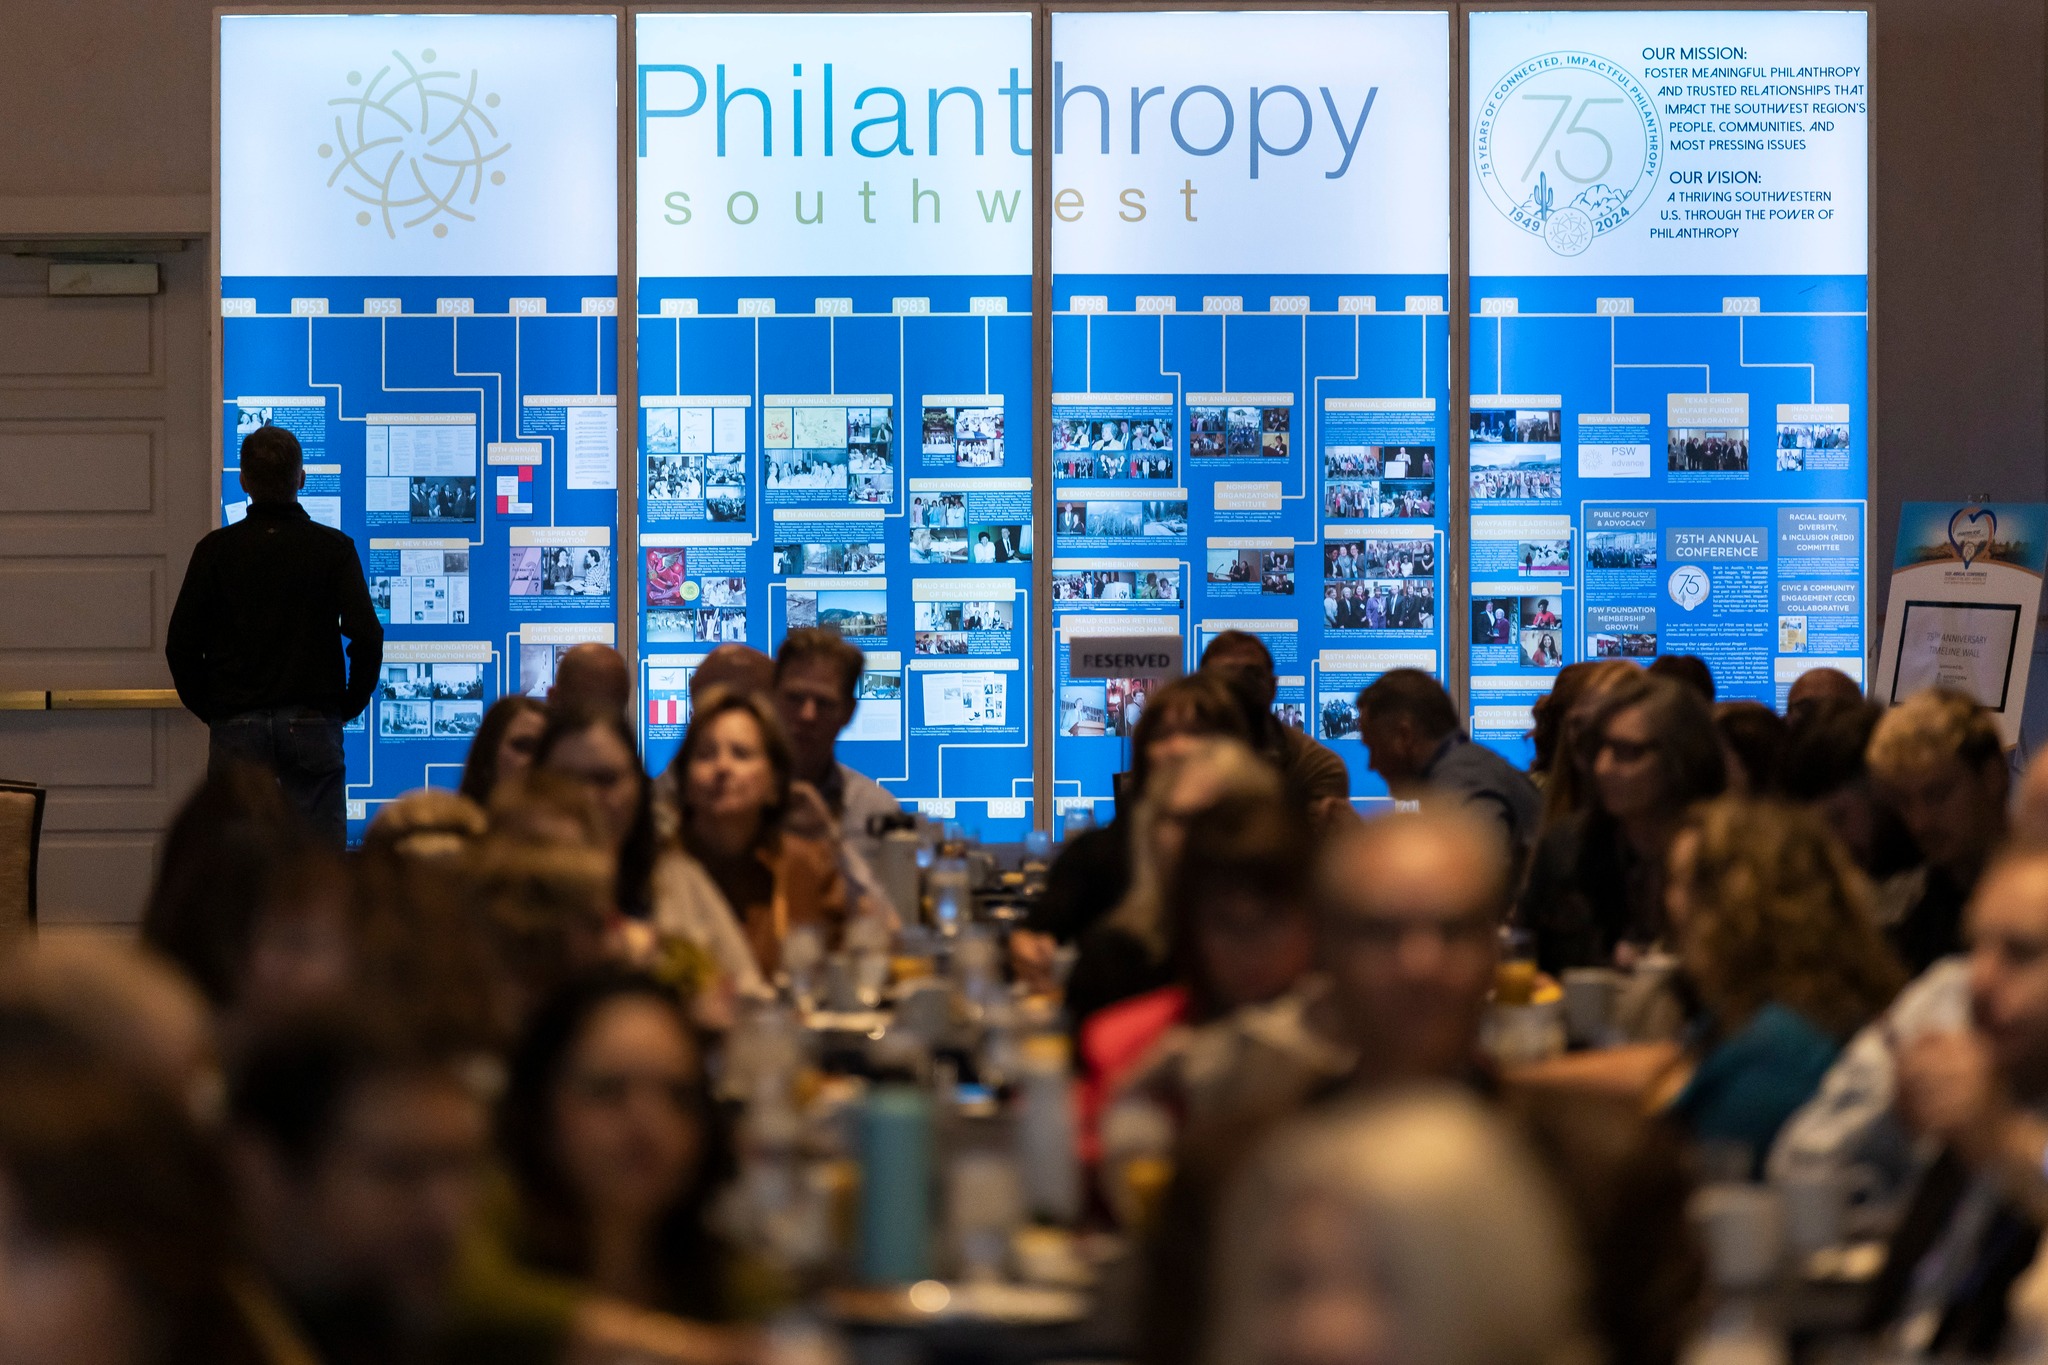 Push10 Branding Agency attends Philanthropy Southwest Conference in Austin Texas